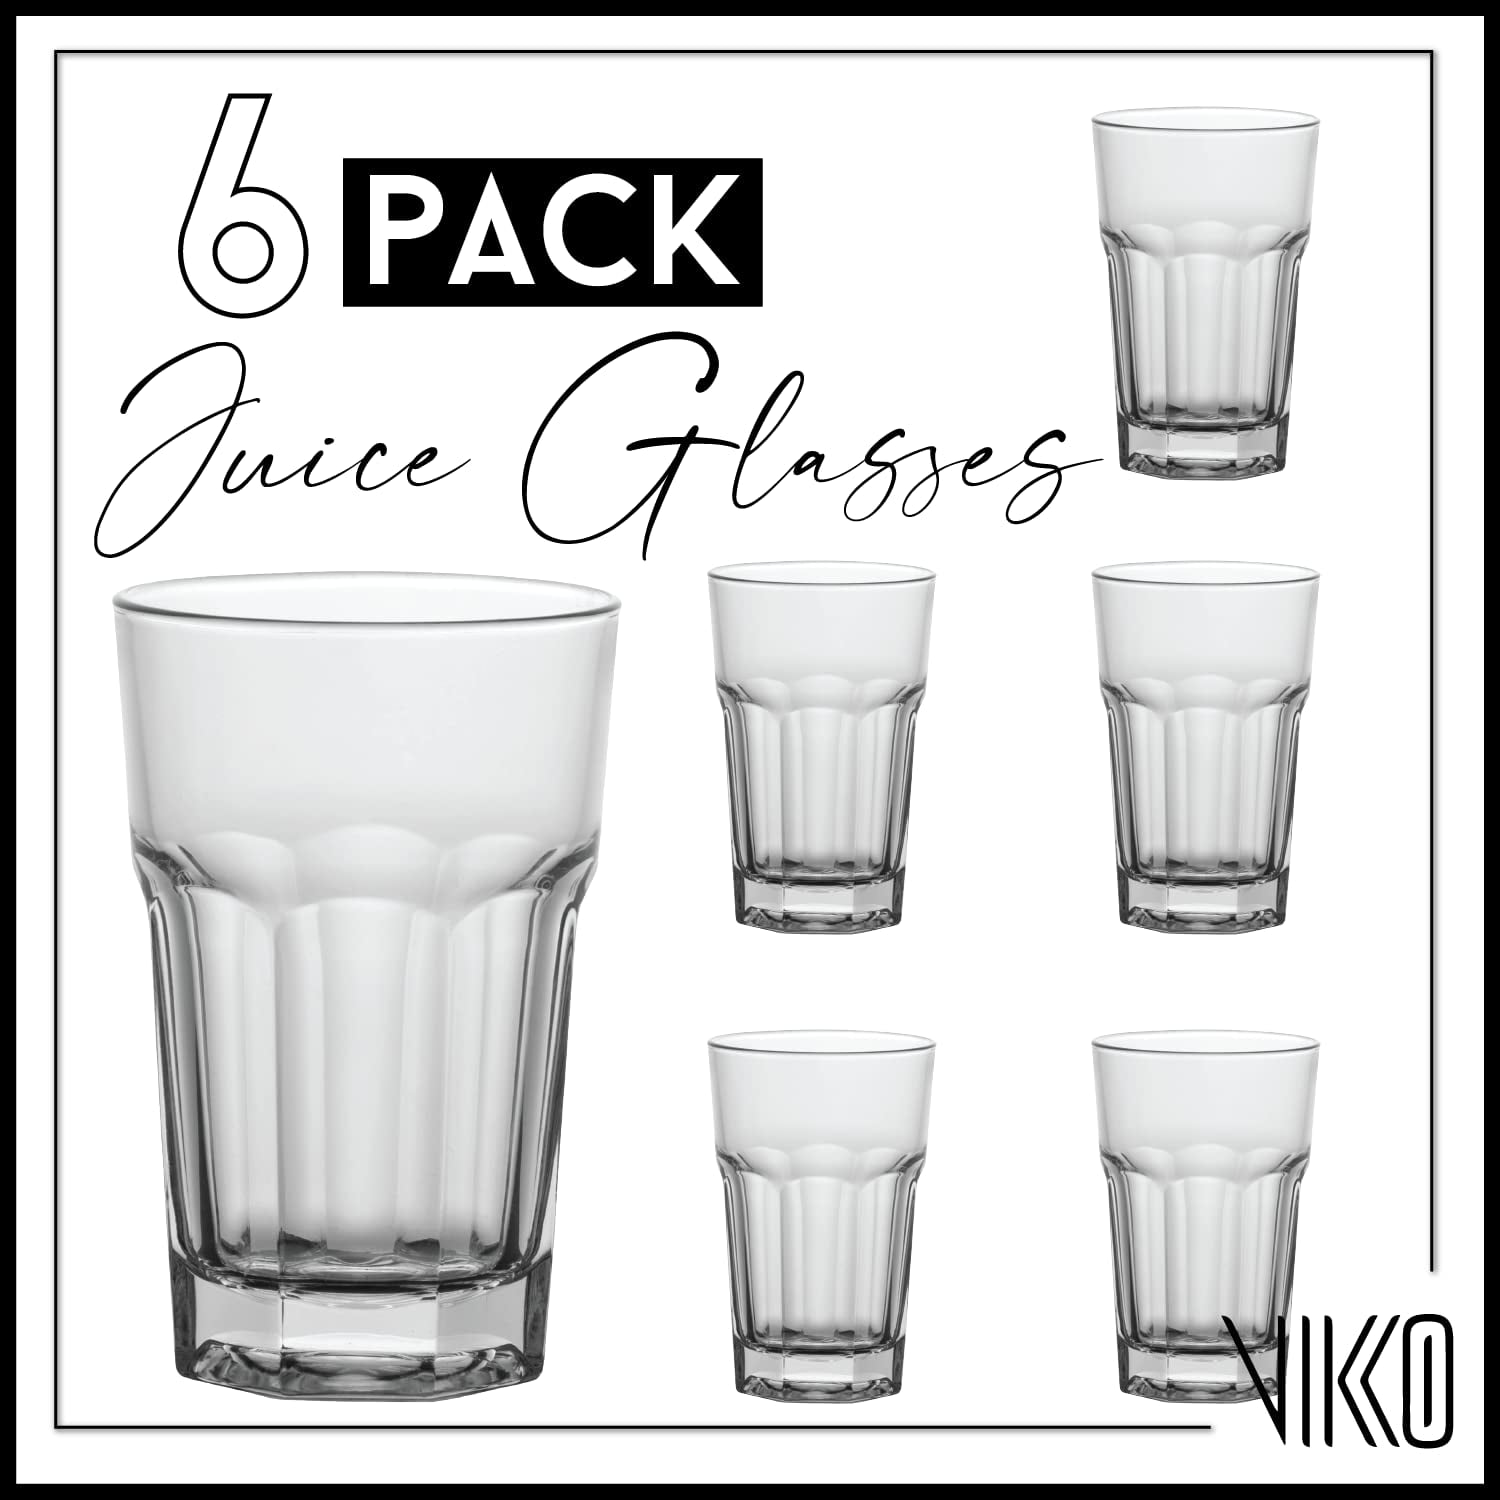 CUKBLESS Drinking Glasses Set of 6, Crystal Highball Water Glasses, Glass  Cups for Water, Juice, Bev…See more CUKBLESS Drinking Glasses Set of 6